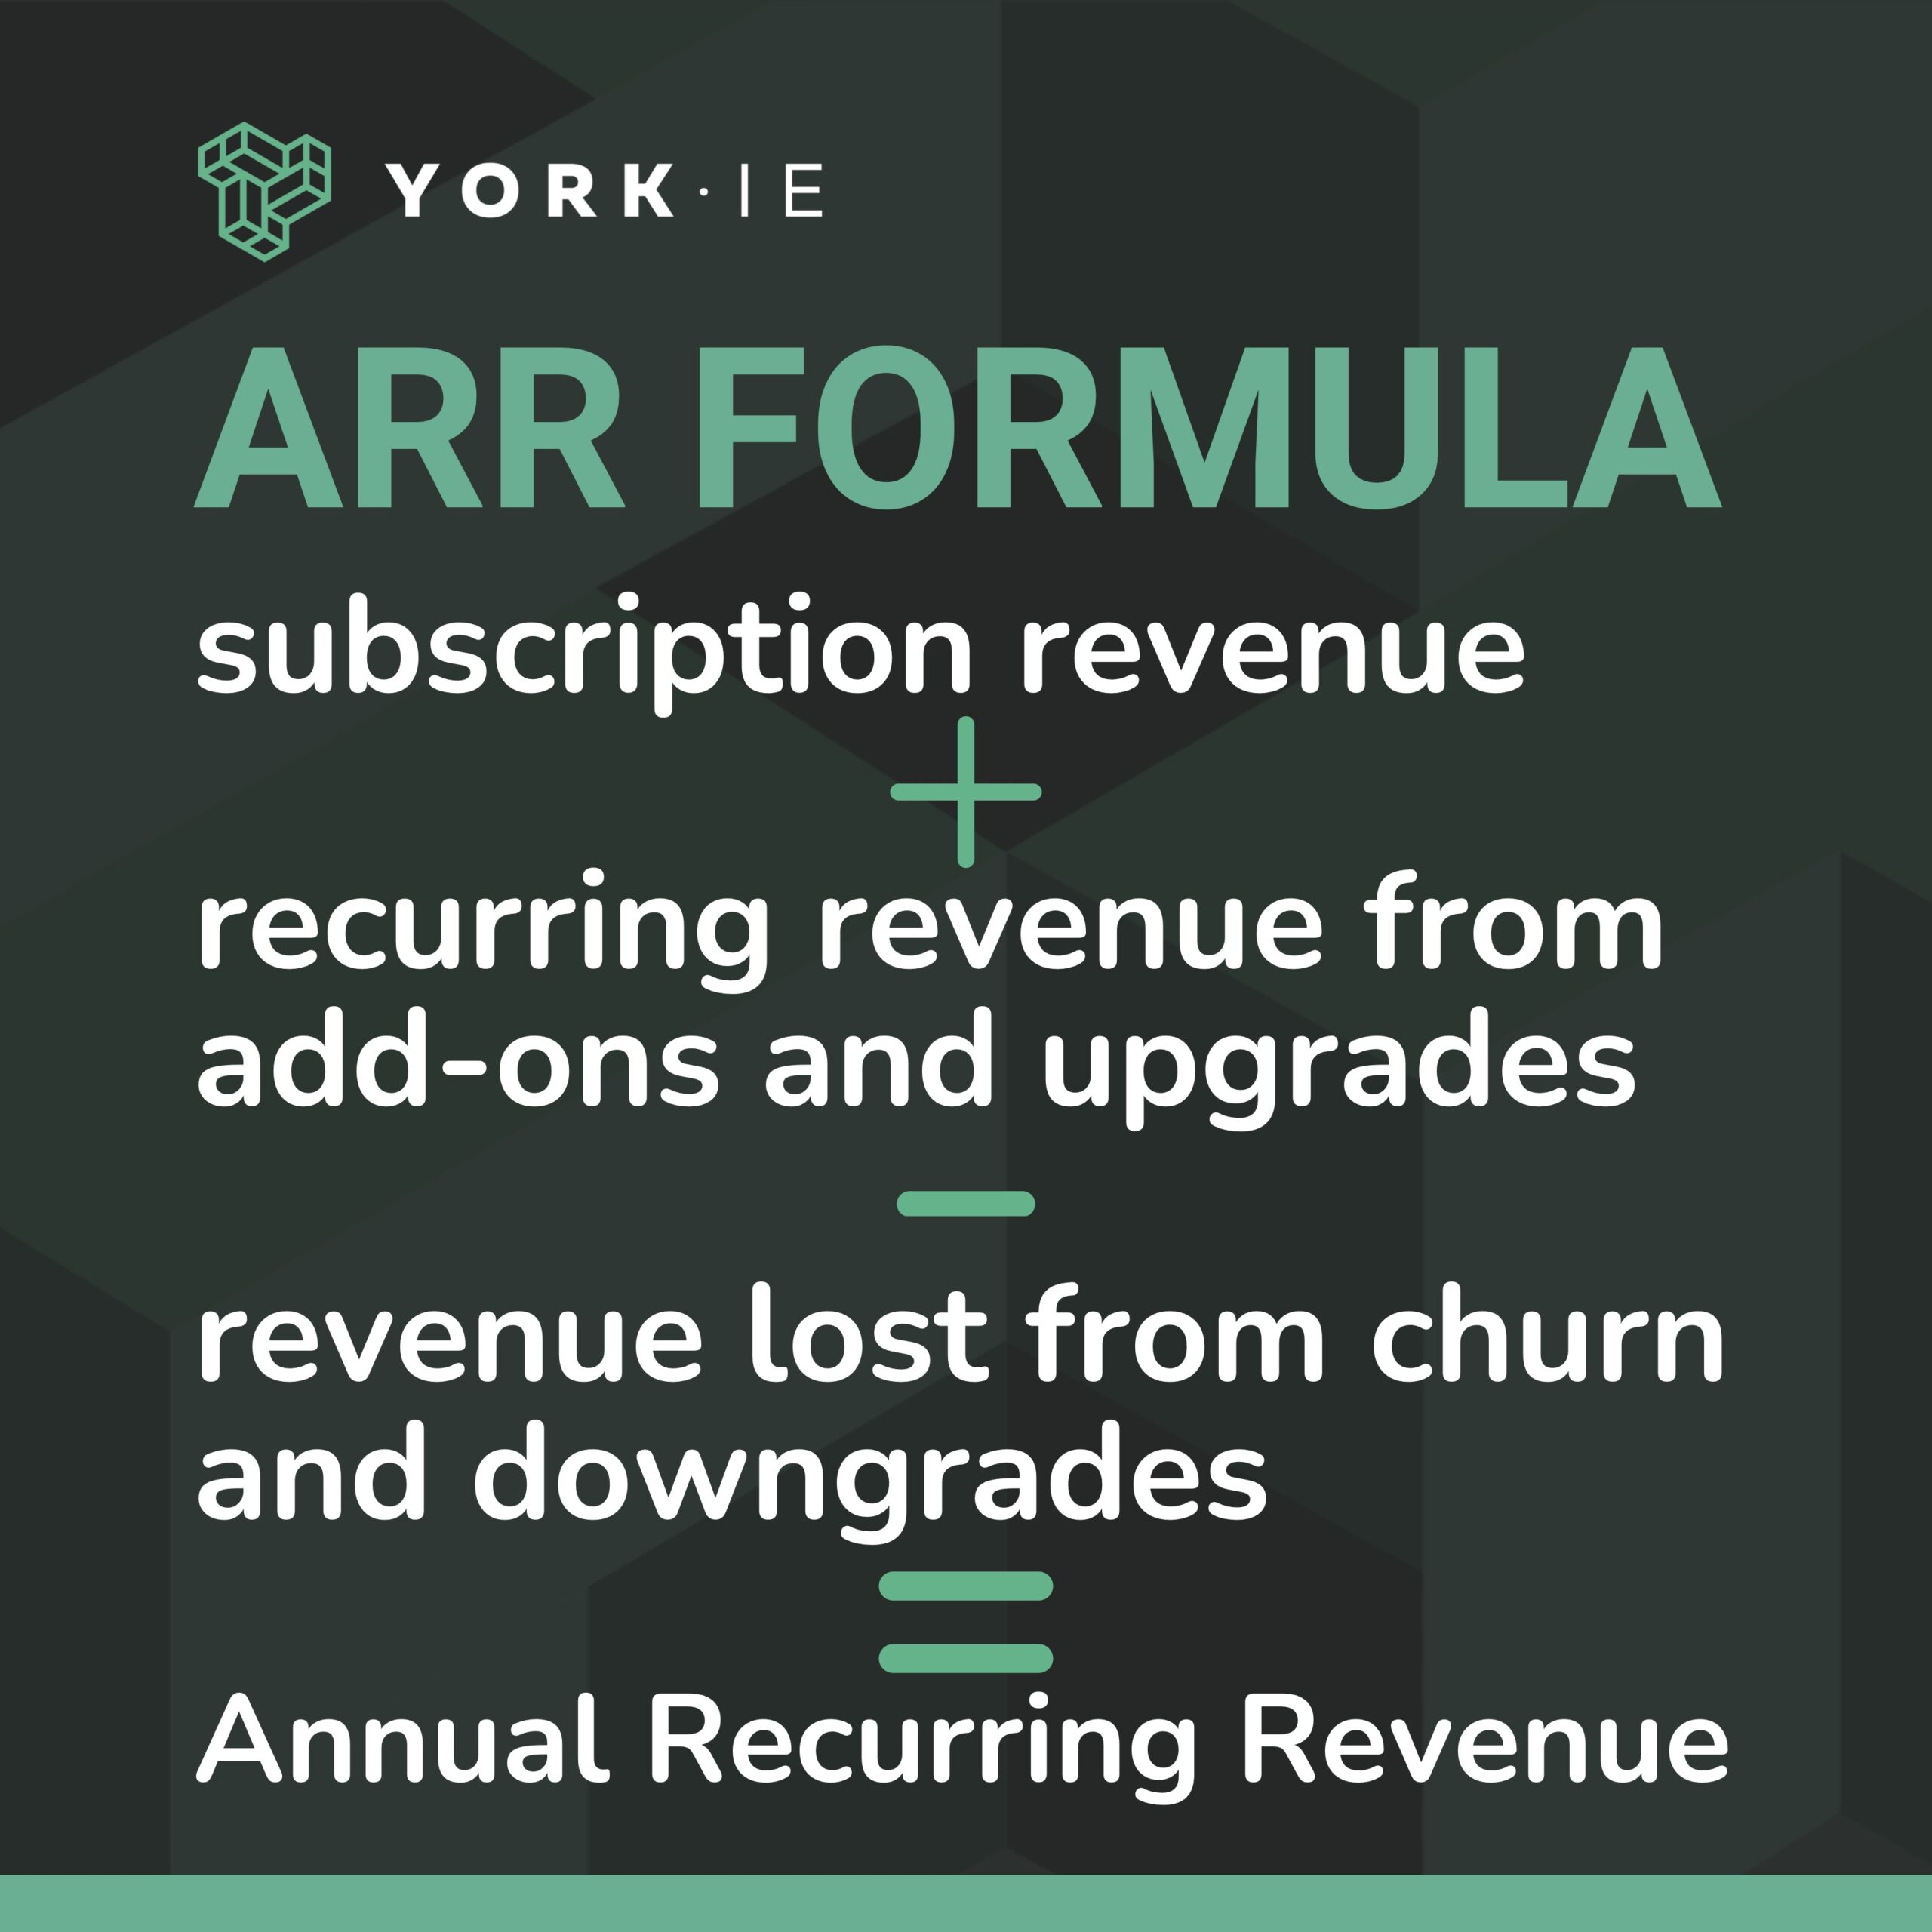 how to calculate arr